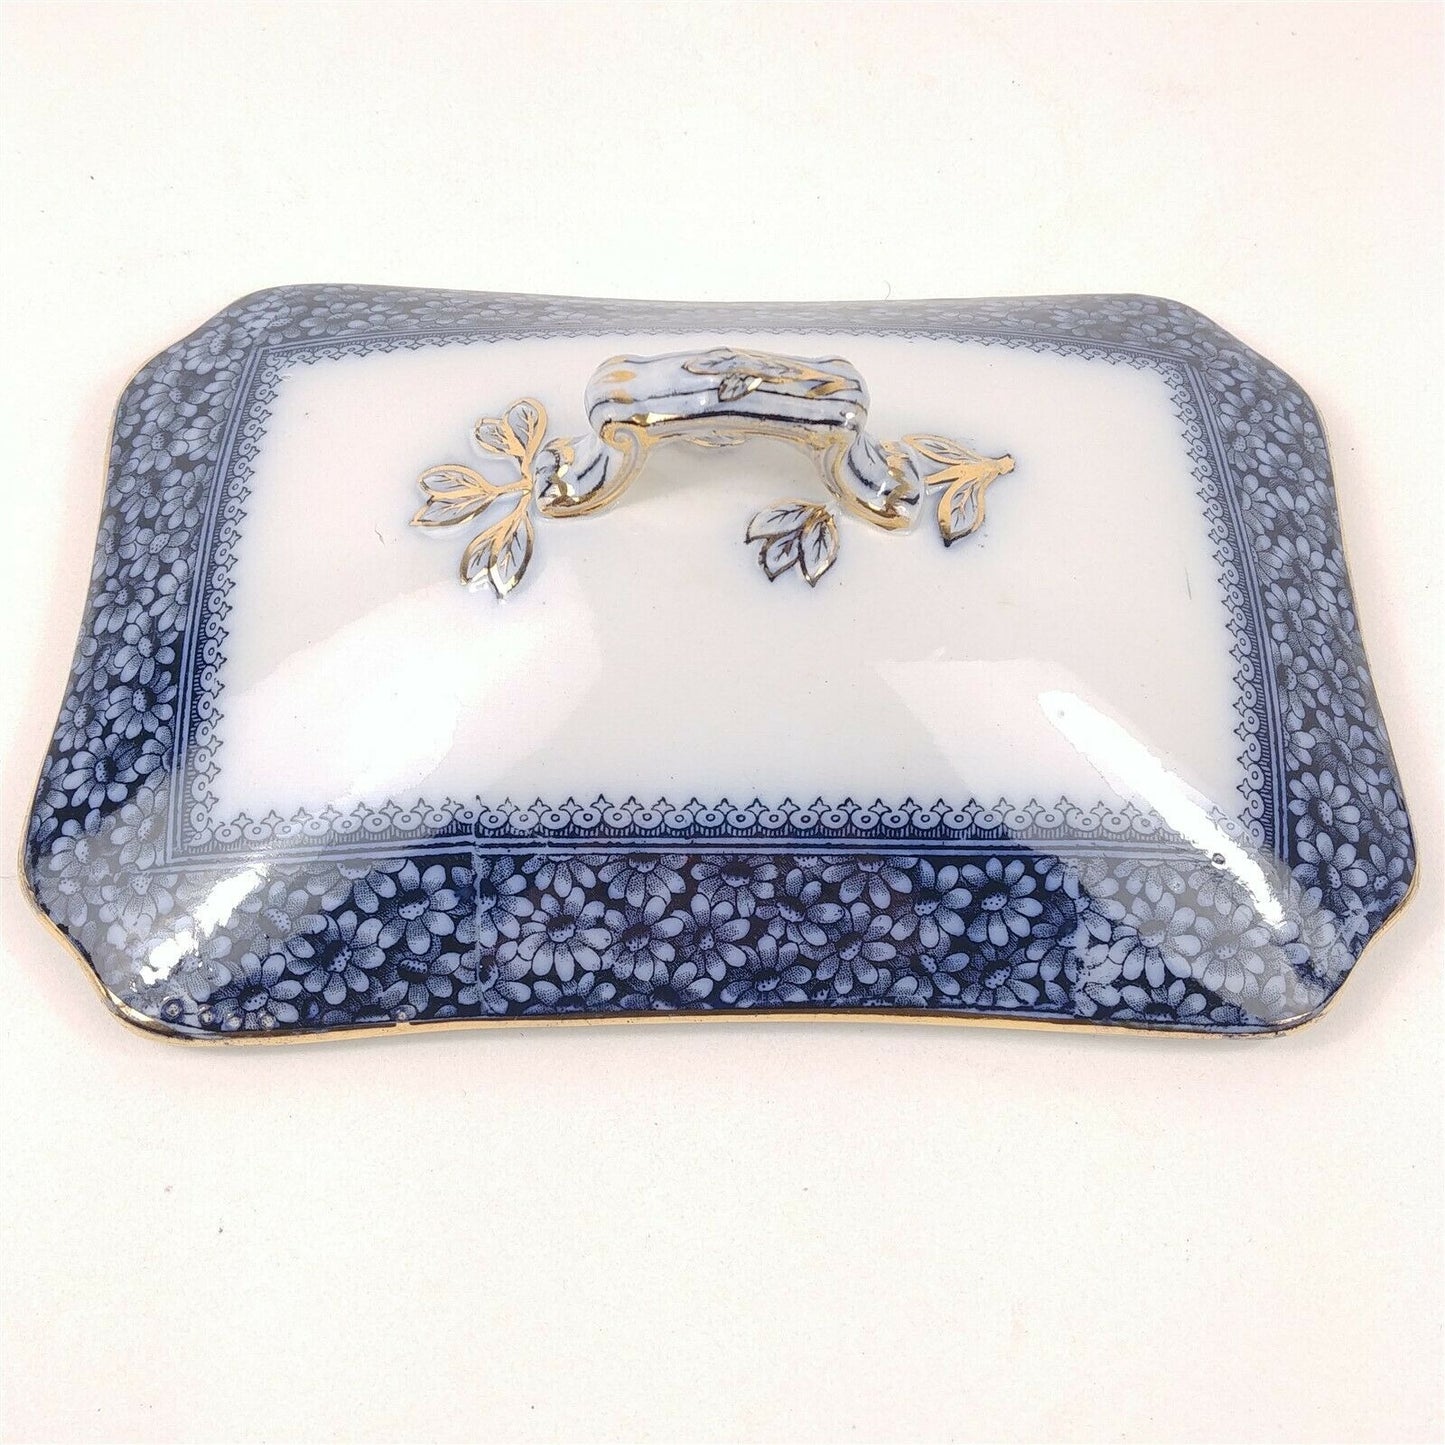 Antique WAA William Alsager Adderley Daisy Blue Replacement Lid for Covered Dish